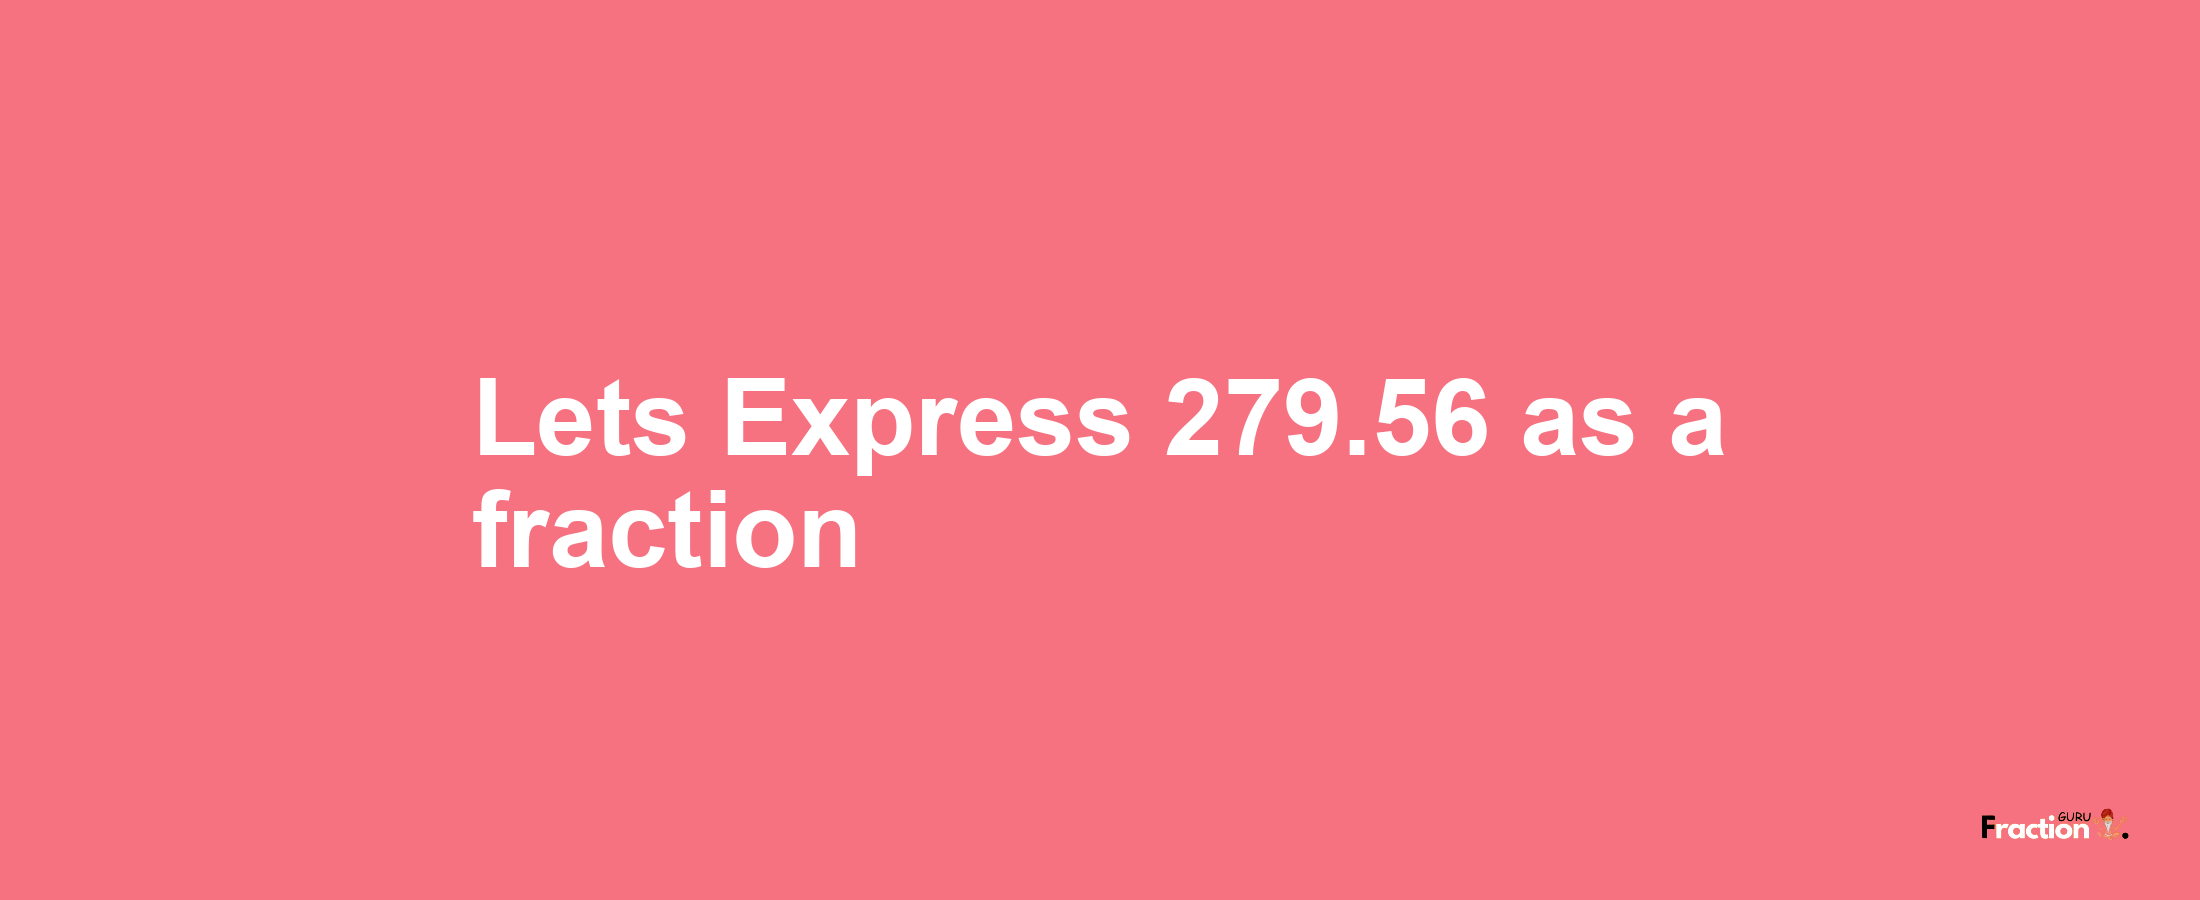 Lets Express 279.56 as afraction